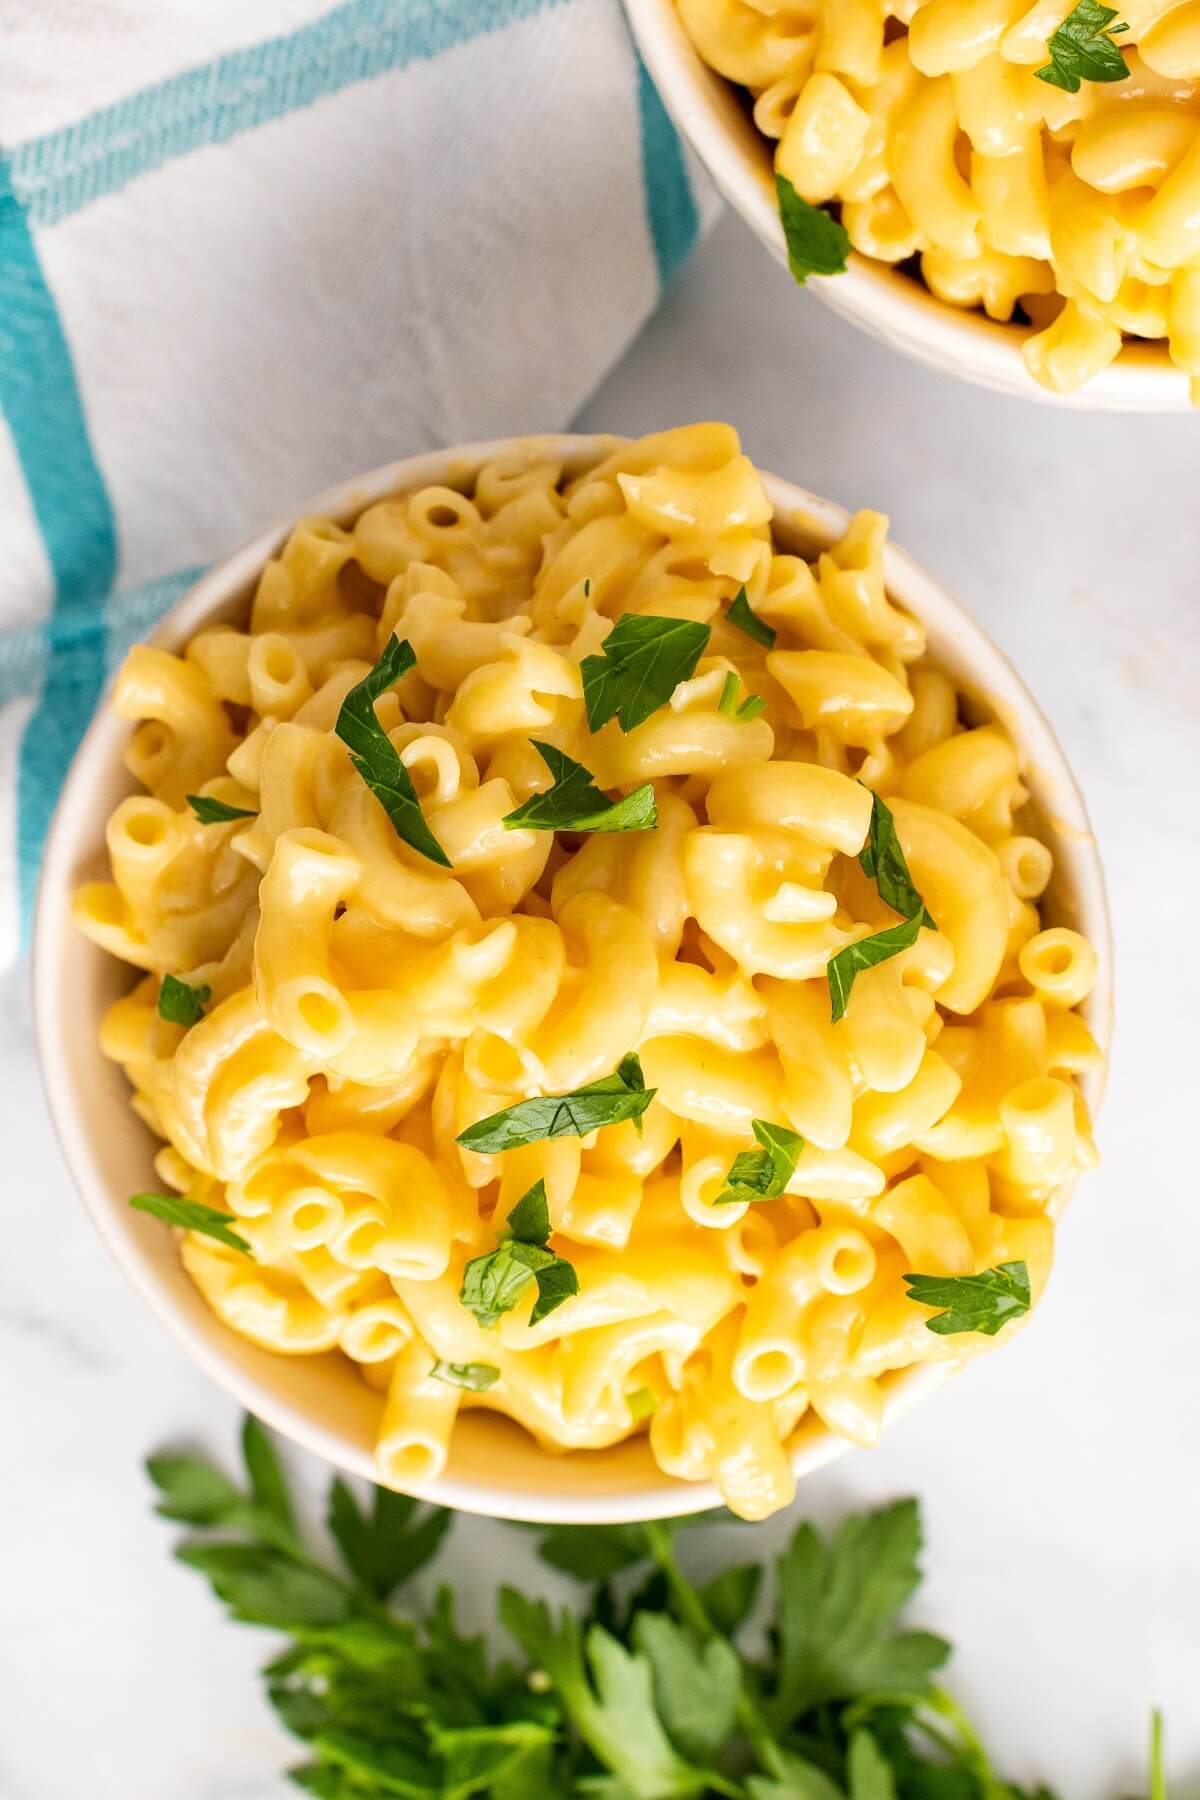 Two bowls full of homemade Mac and cheese, garnished with fresh parsley sitting next to fresh Italian parsley sprigs and a cloth kitchen towel.